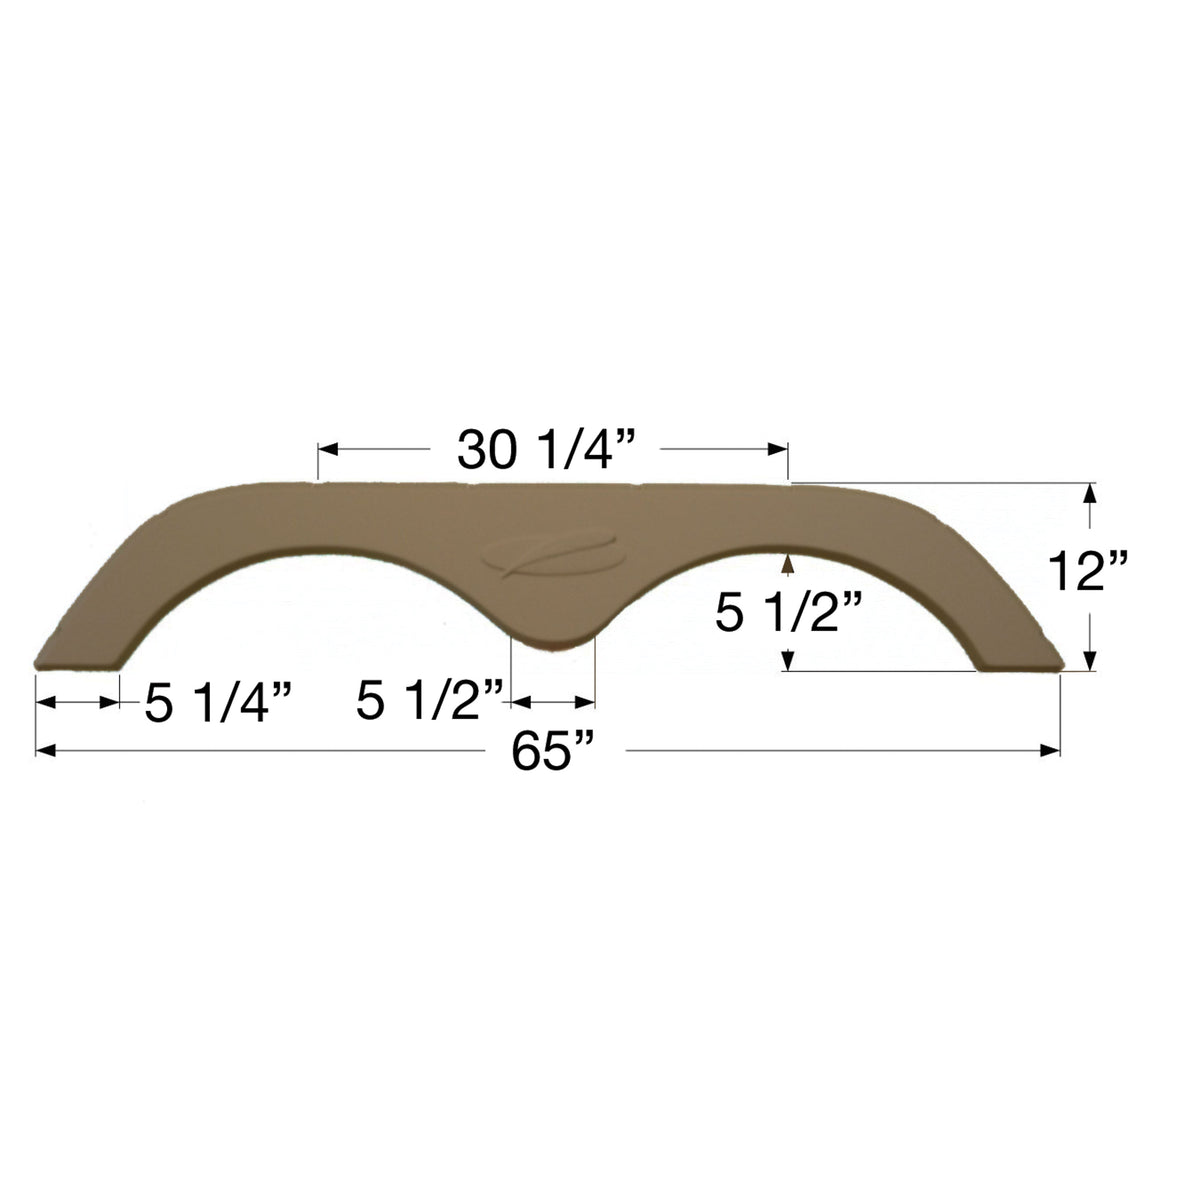 Icon 01638 Tandem Axle Fender Skirt FS775 for R-Vision 5th Wheel Travel Trailer - Taupe